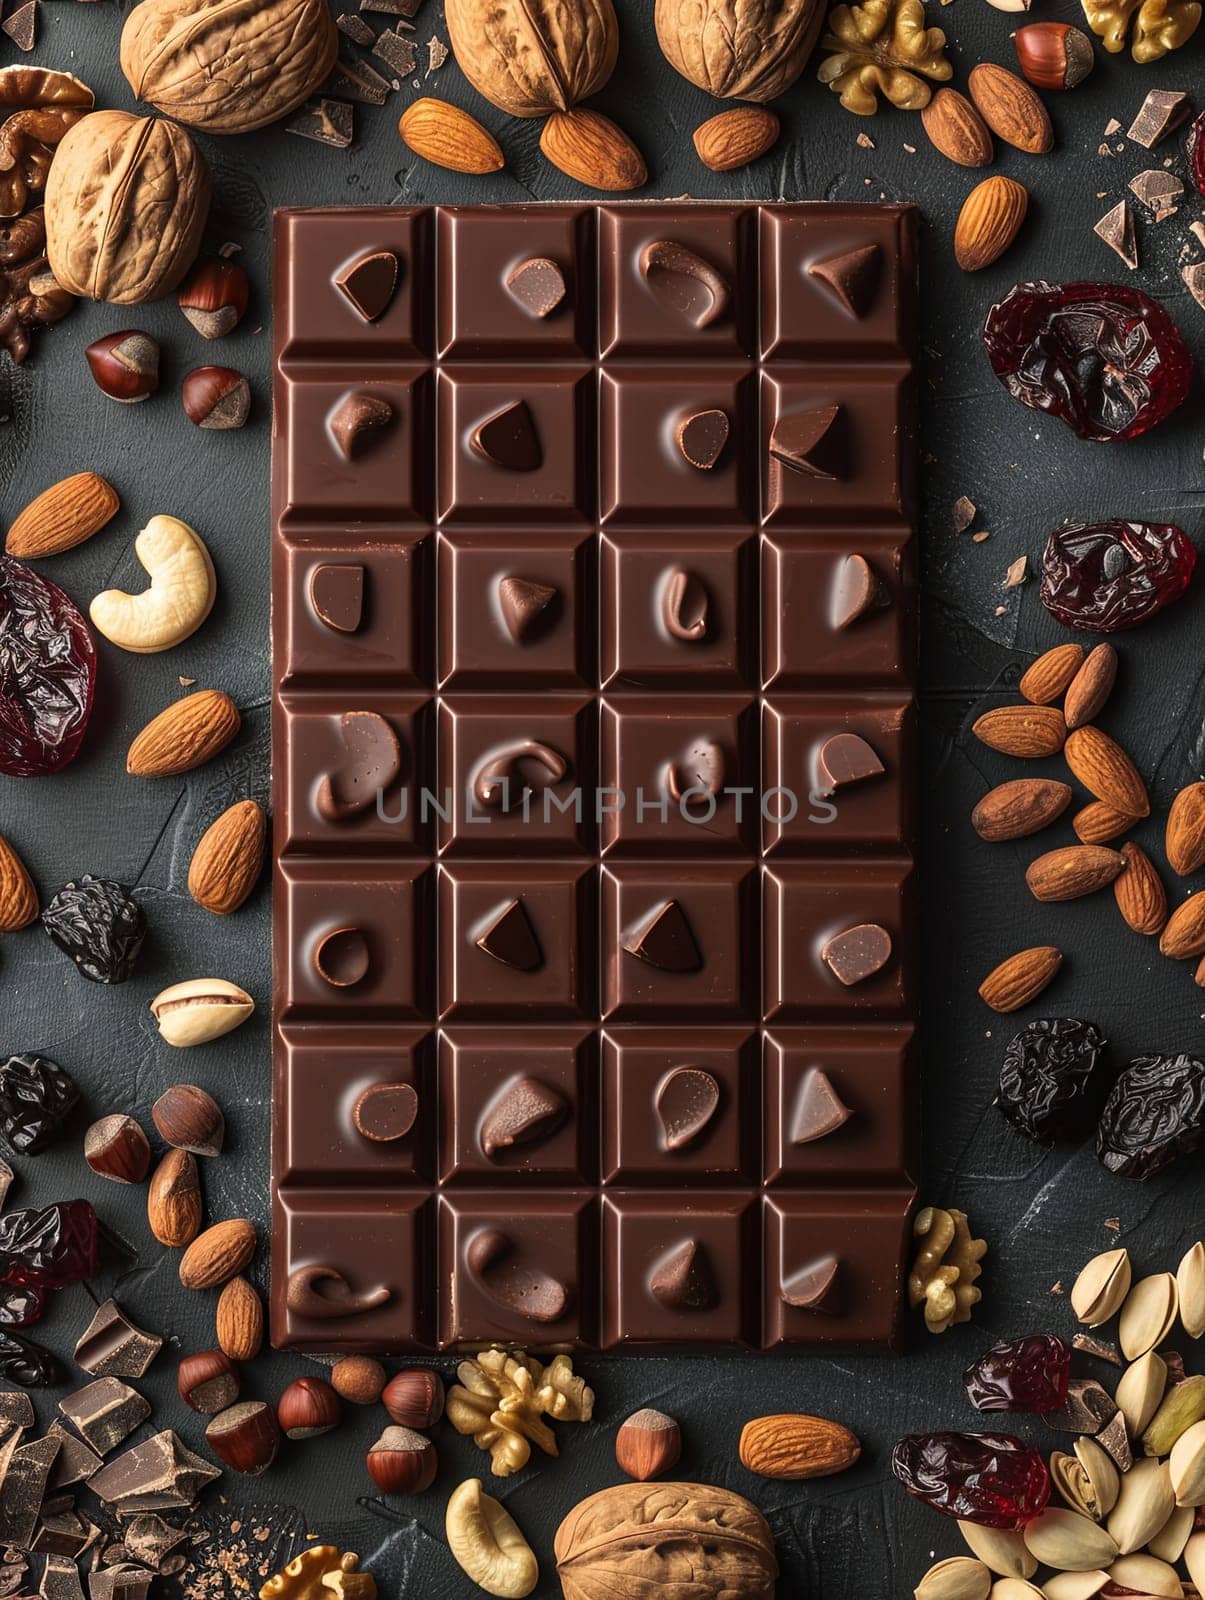 Close-up of a chocolate bar surrounded by various nuts and dried fruits, creating a visually appealing and appetizing display.